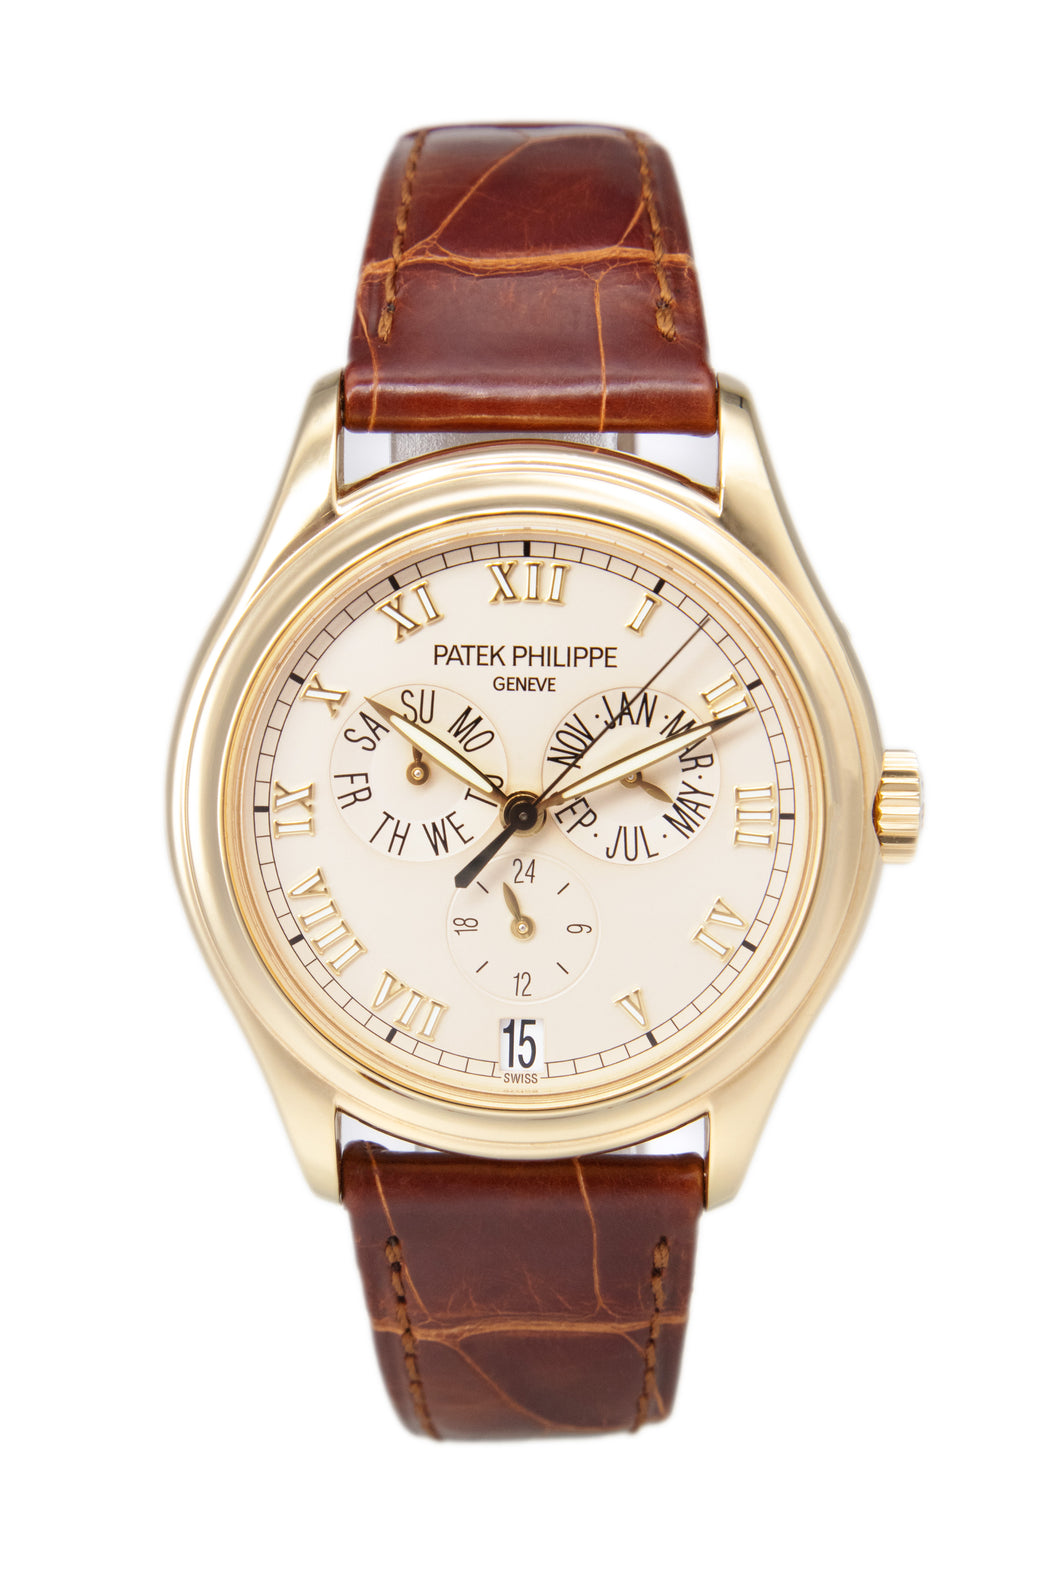 
37mm

18k Yellow Gold

Automatic movement

Annual Calendar

Brown ...